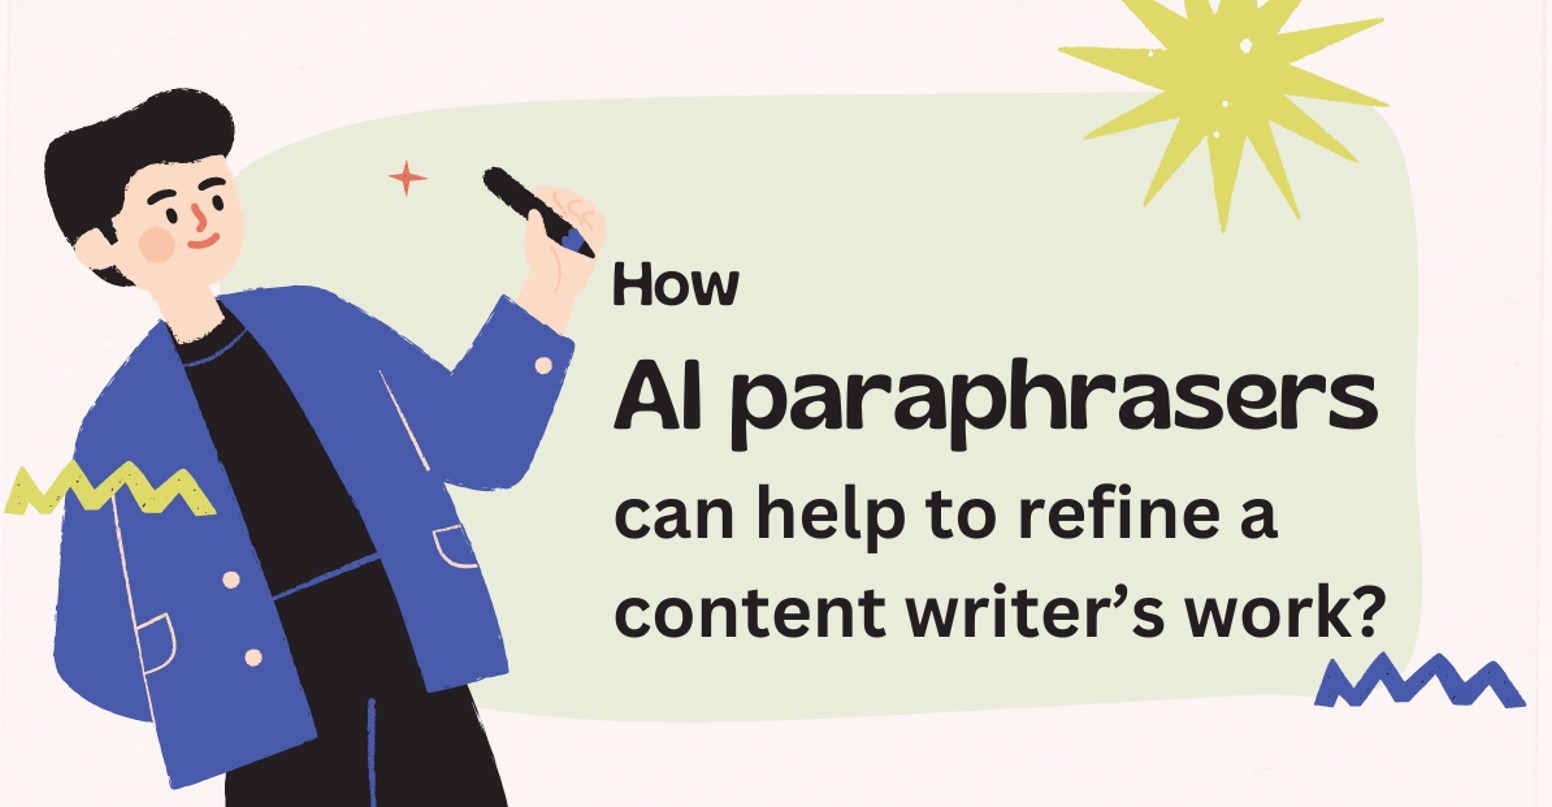 How AI paraphrasers can help refine a content writers work